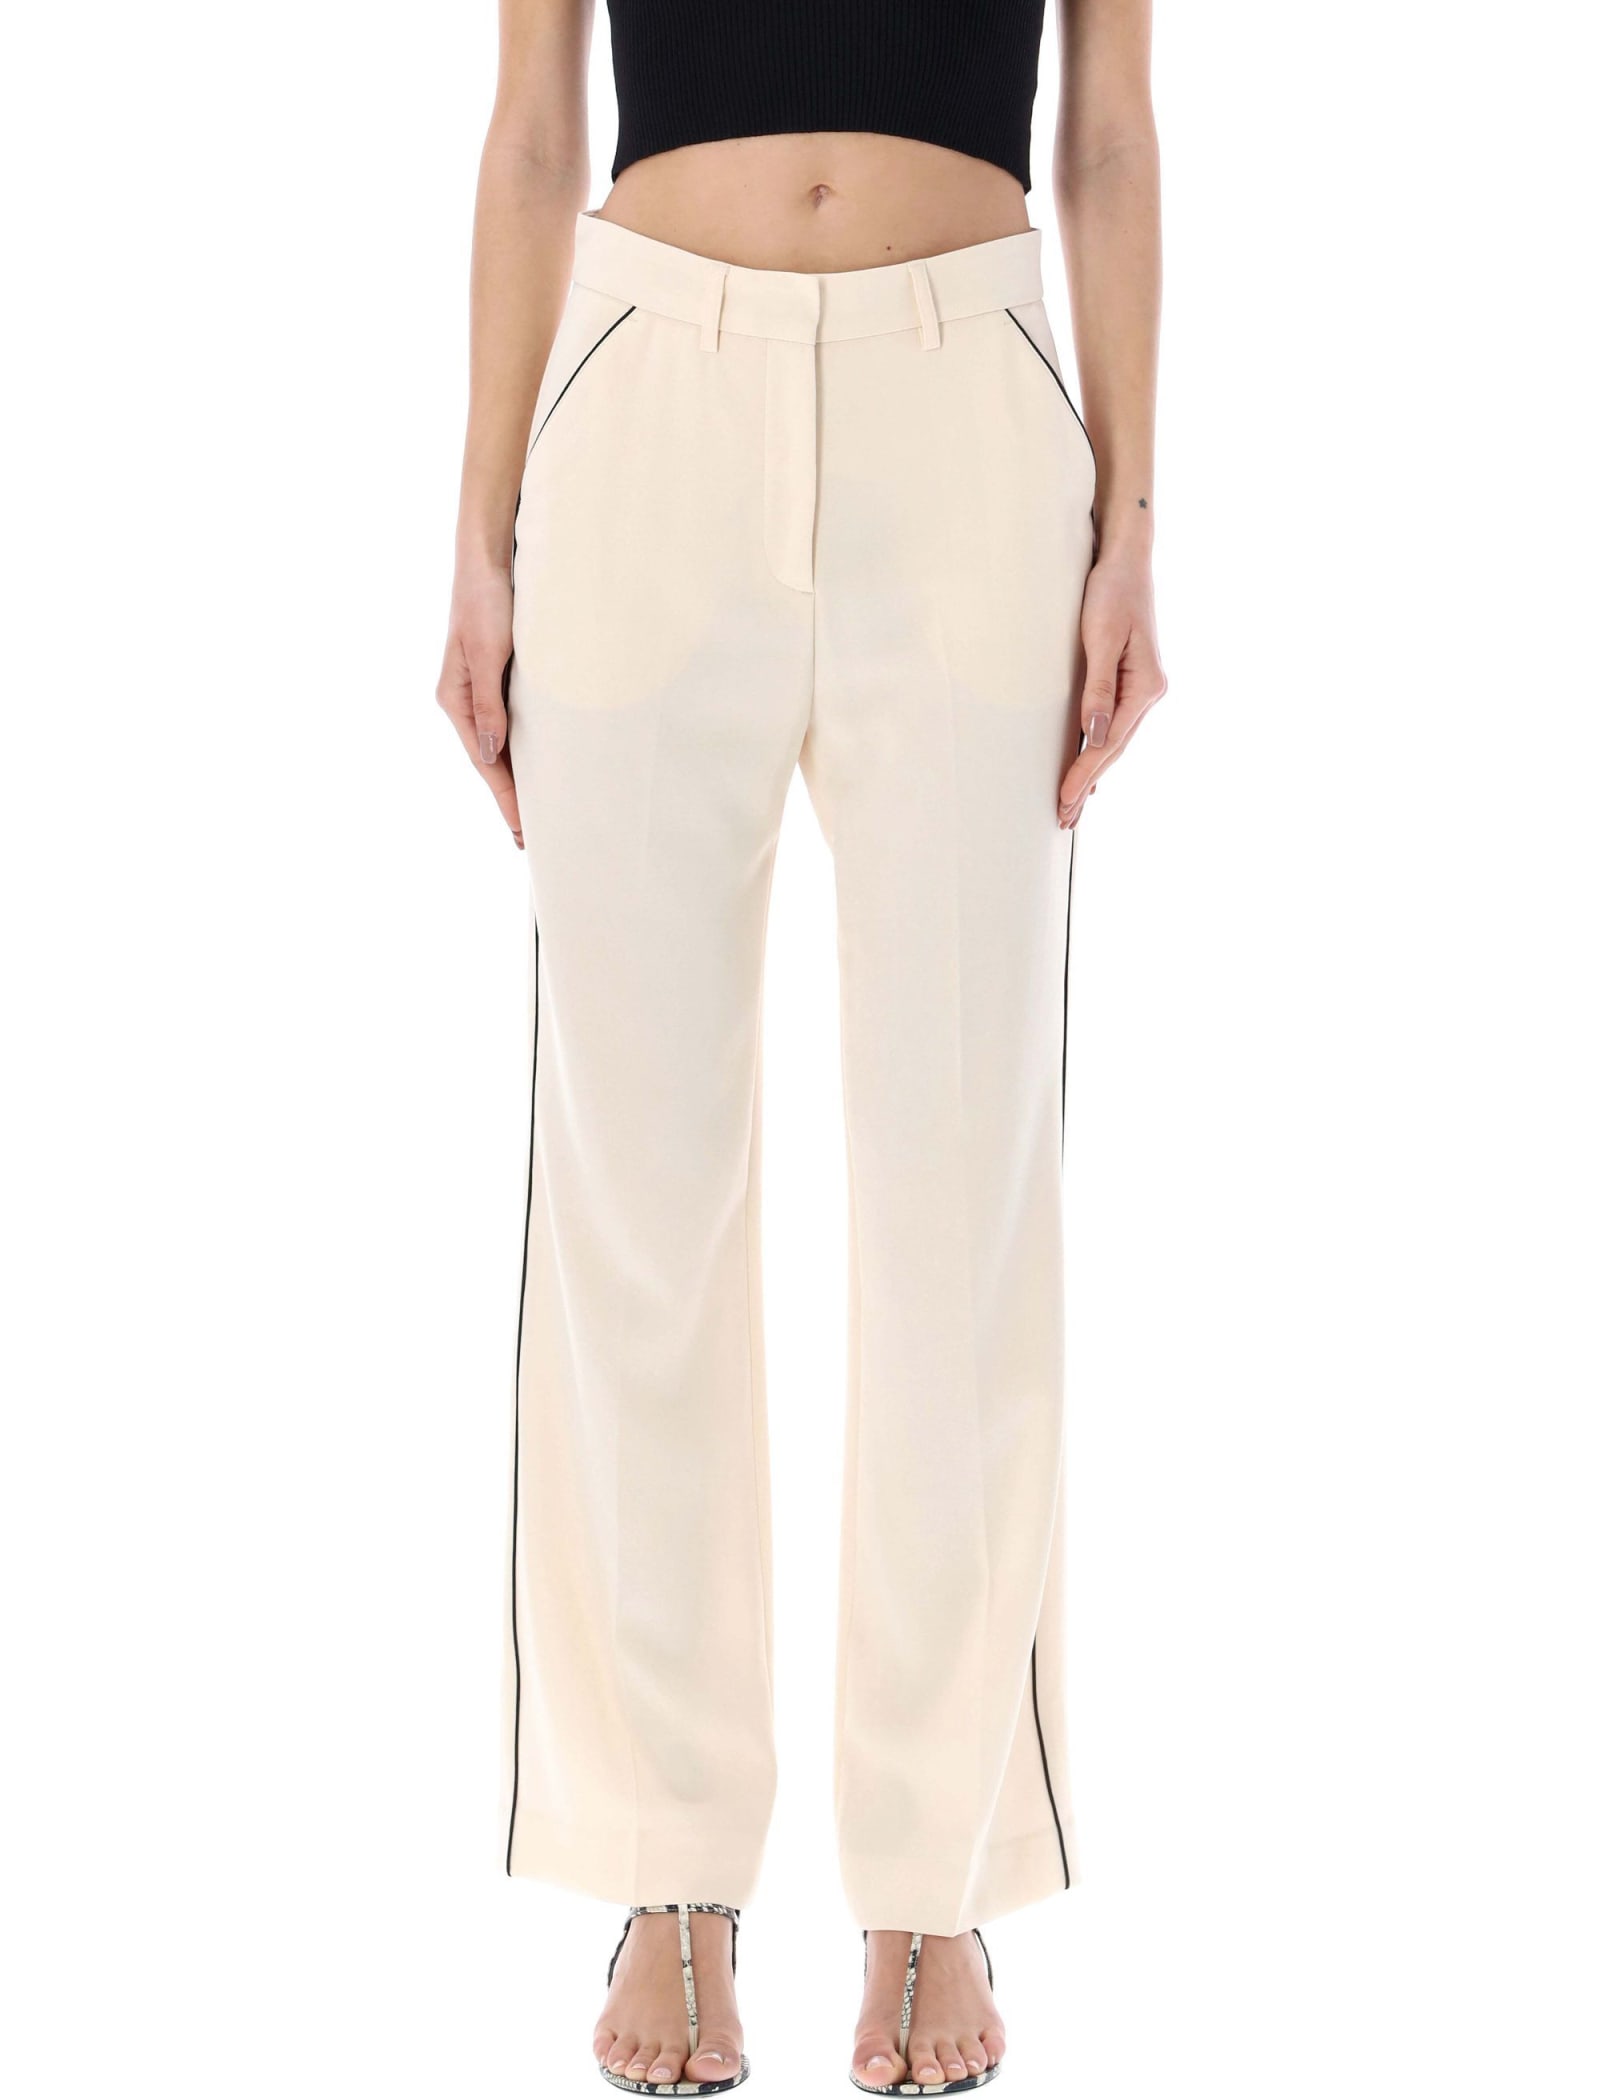 SEE BY CHLOÉ FLARED PIPING PANTS